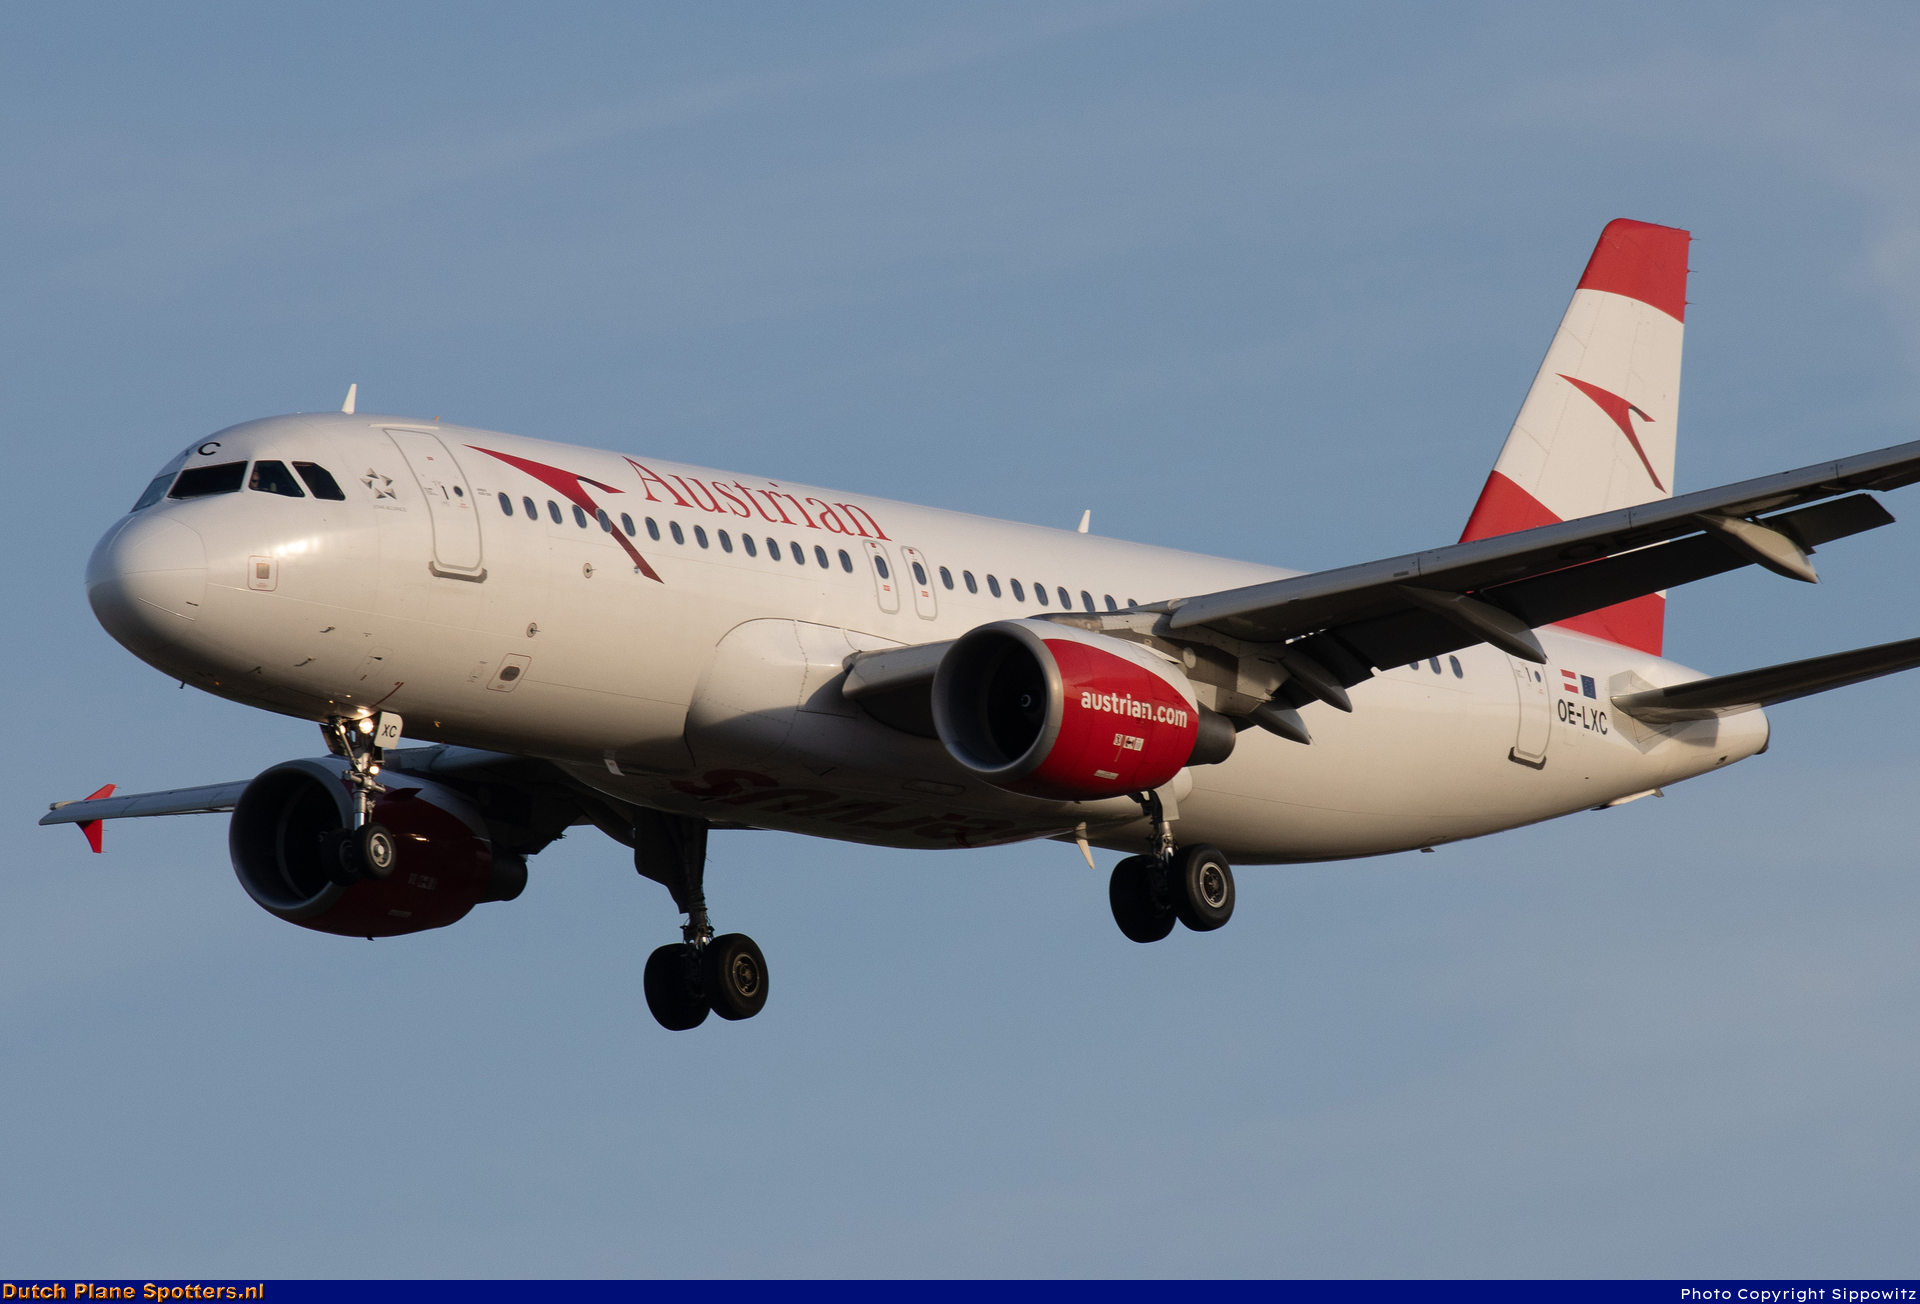 OE-LXC Airbus A320 Austrian Airlines by Sippowitz